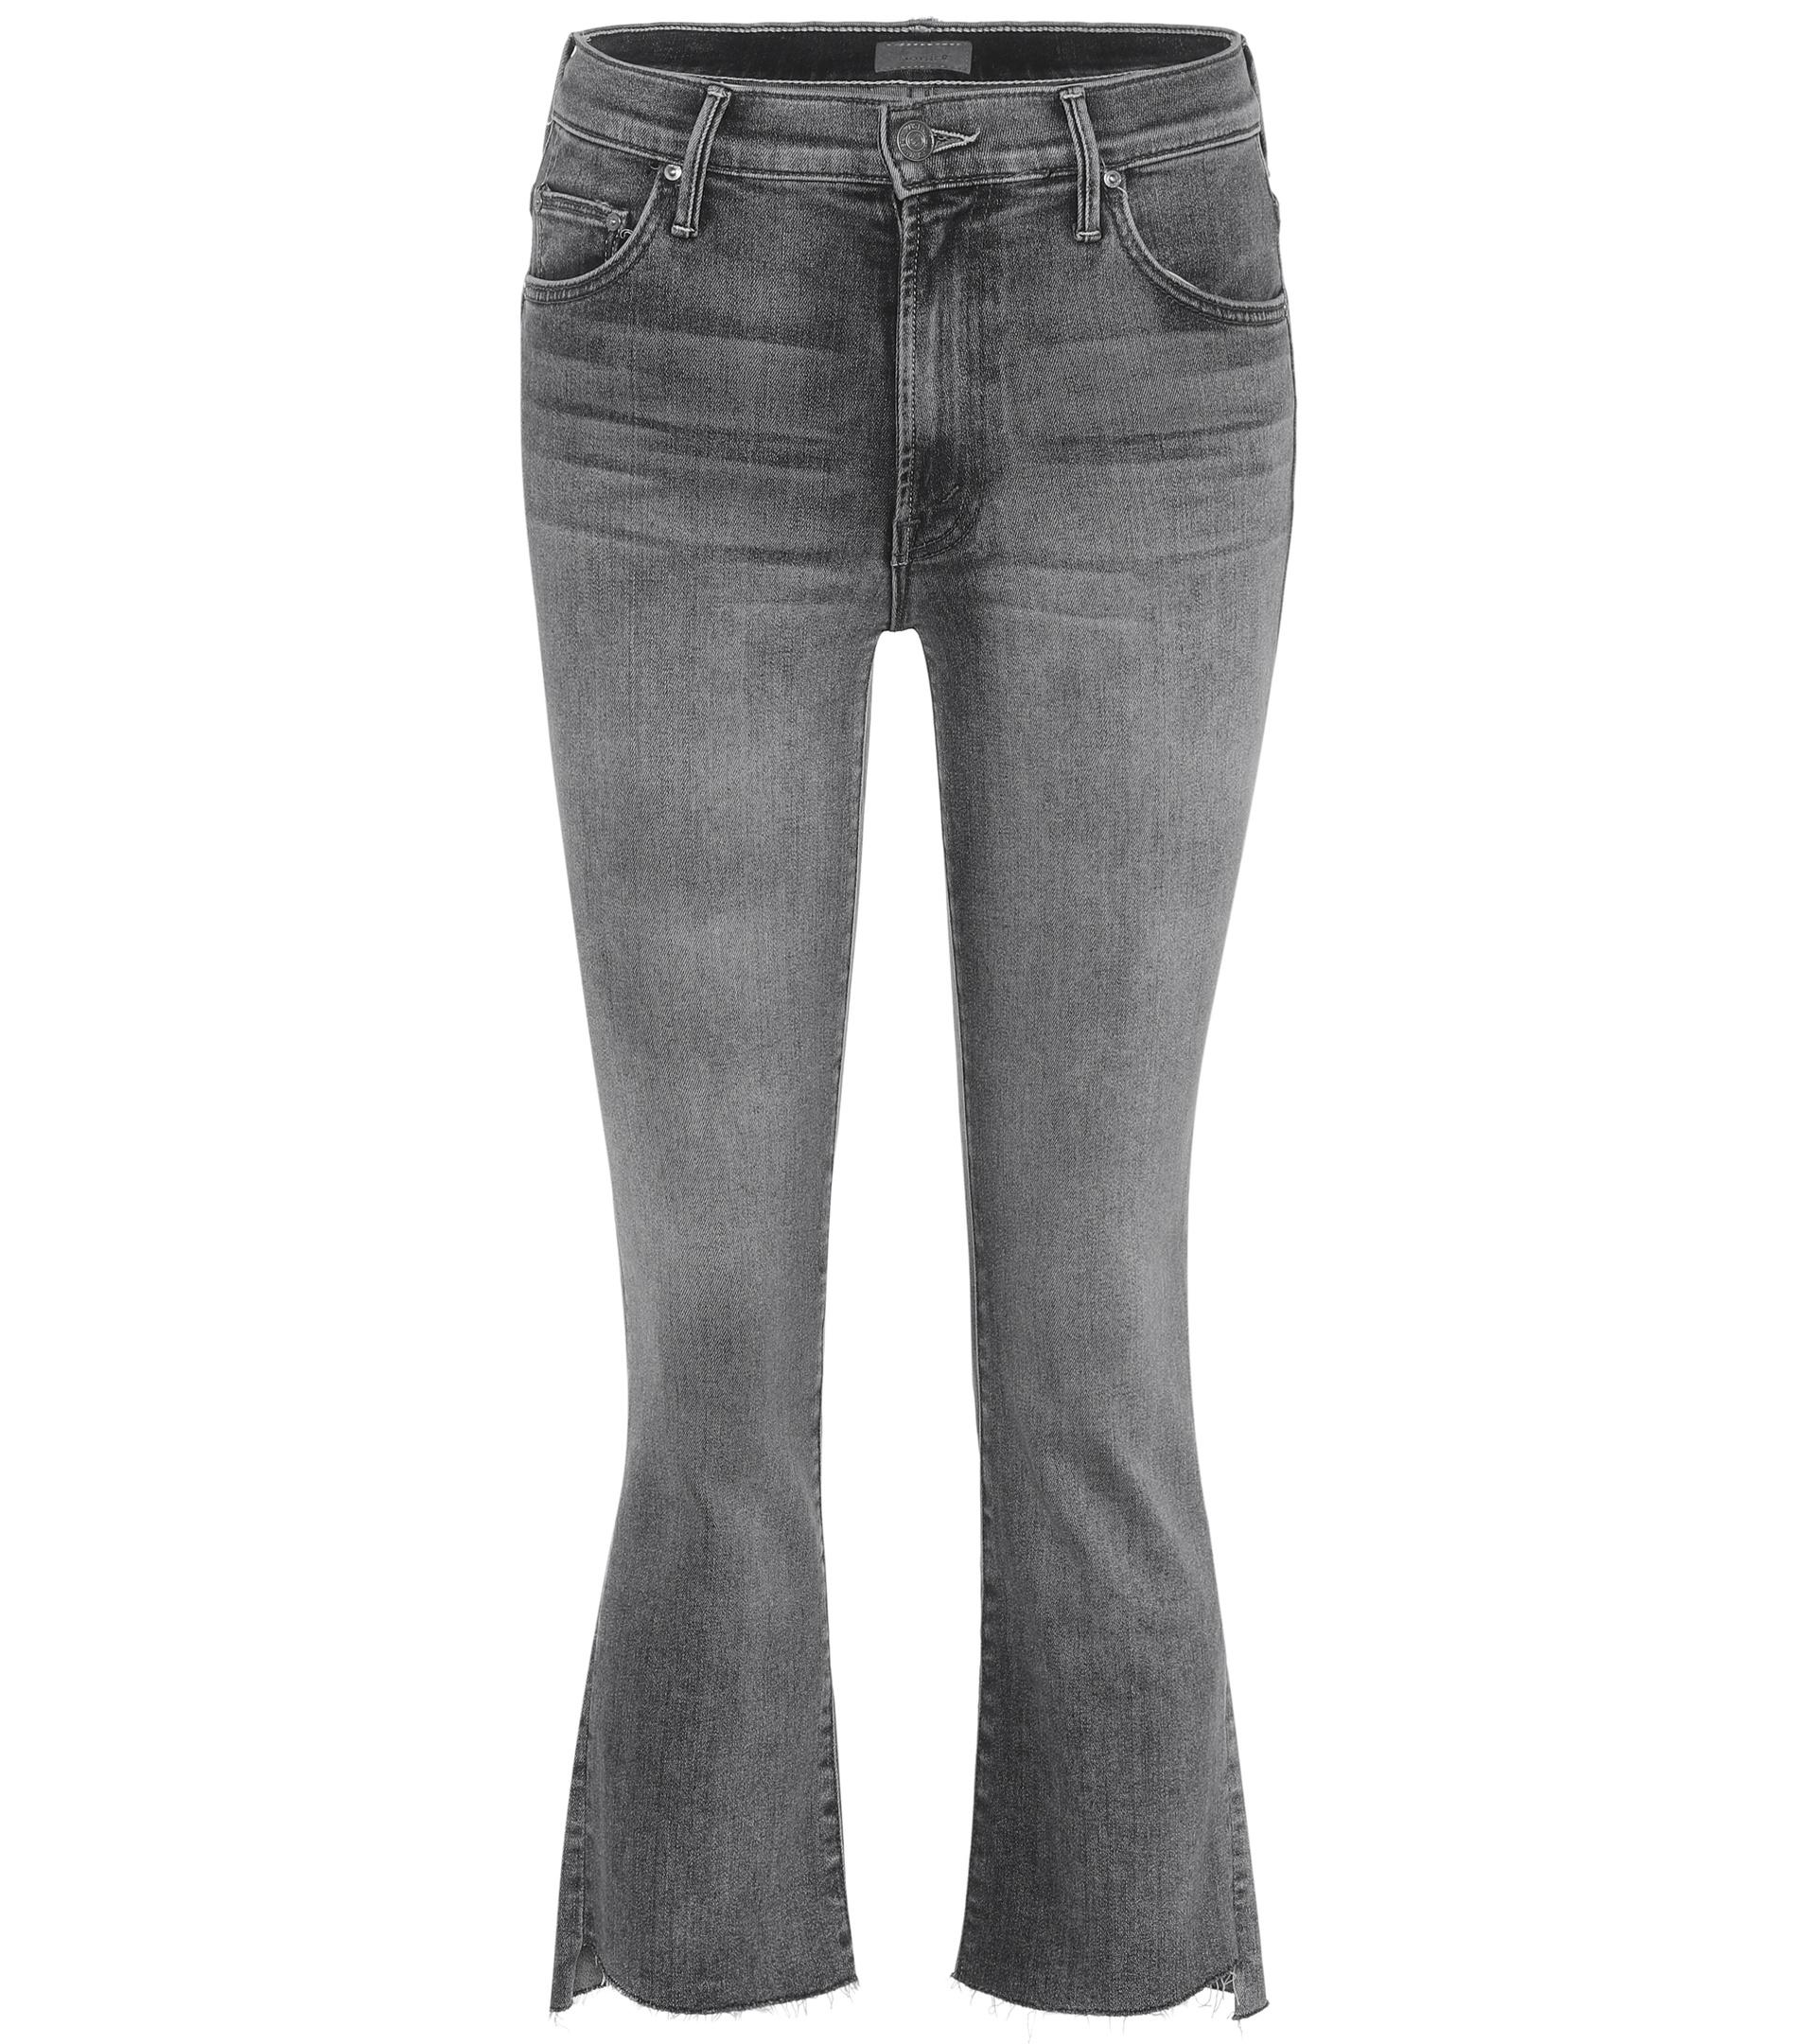 Lyst - Mother Insider Crop Step Fray Jeans in Gray